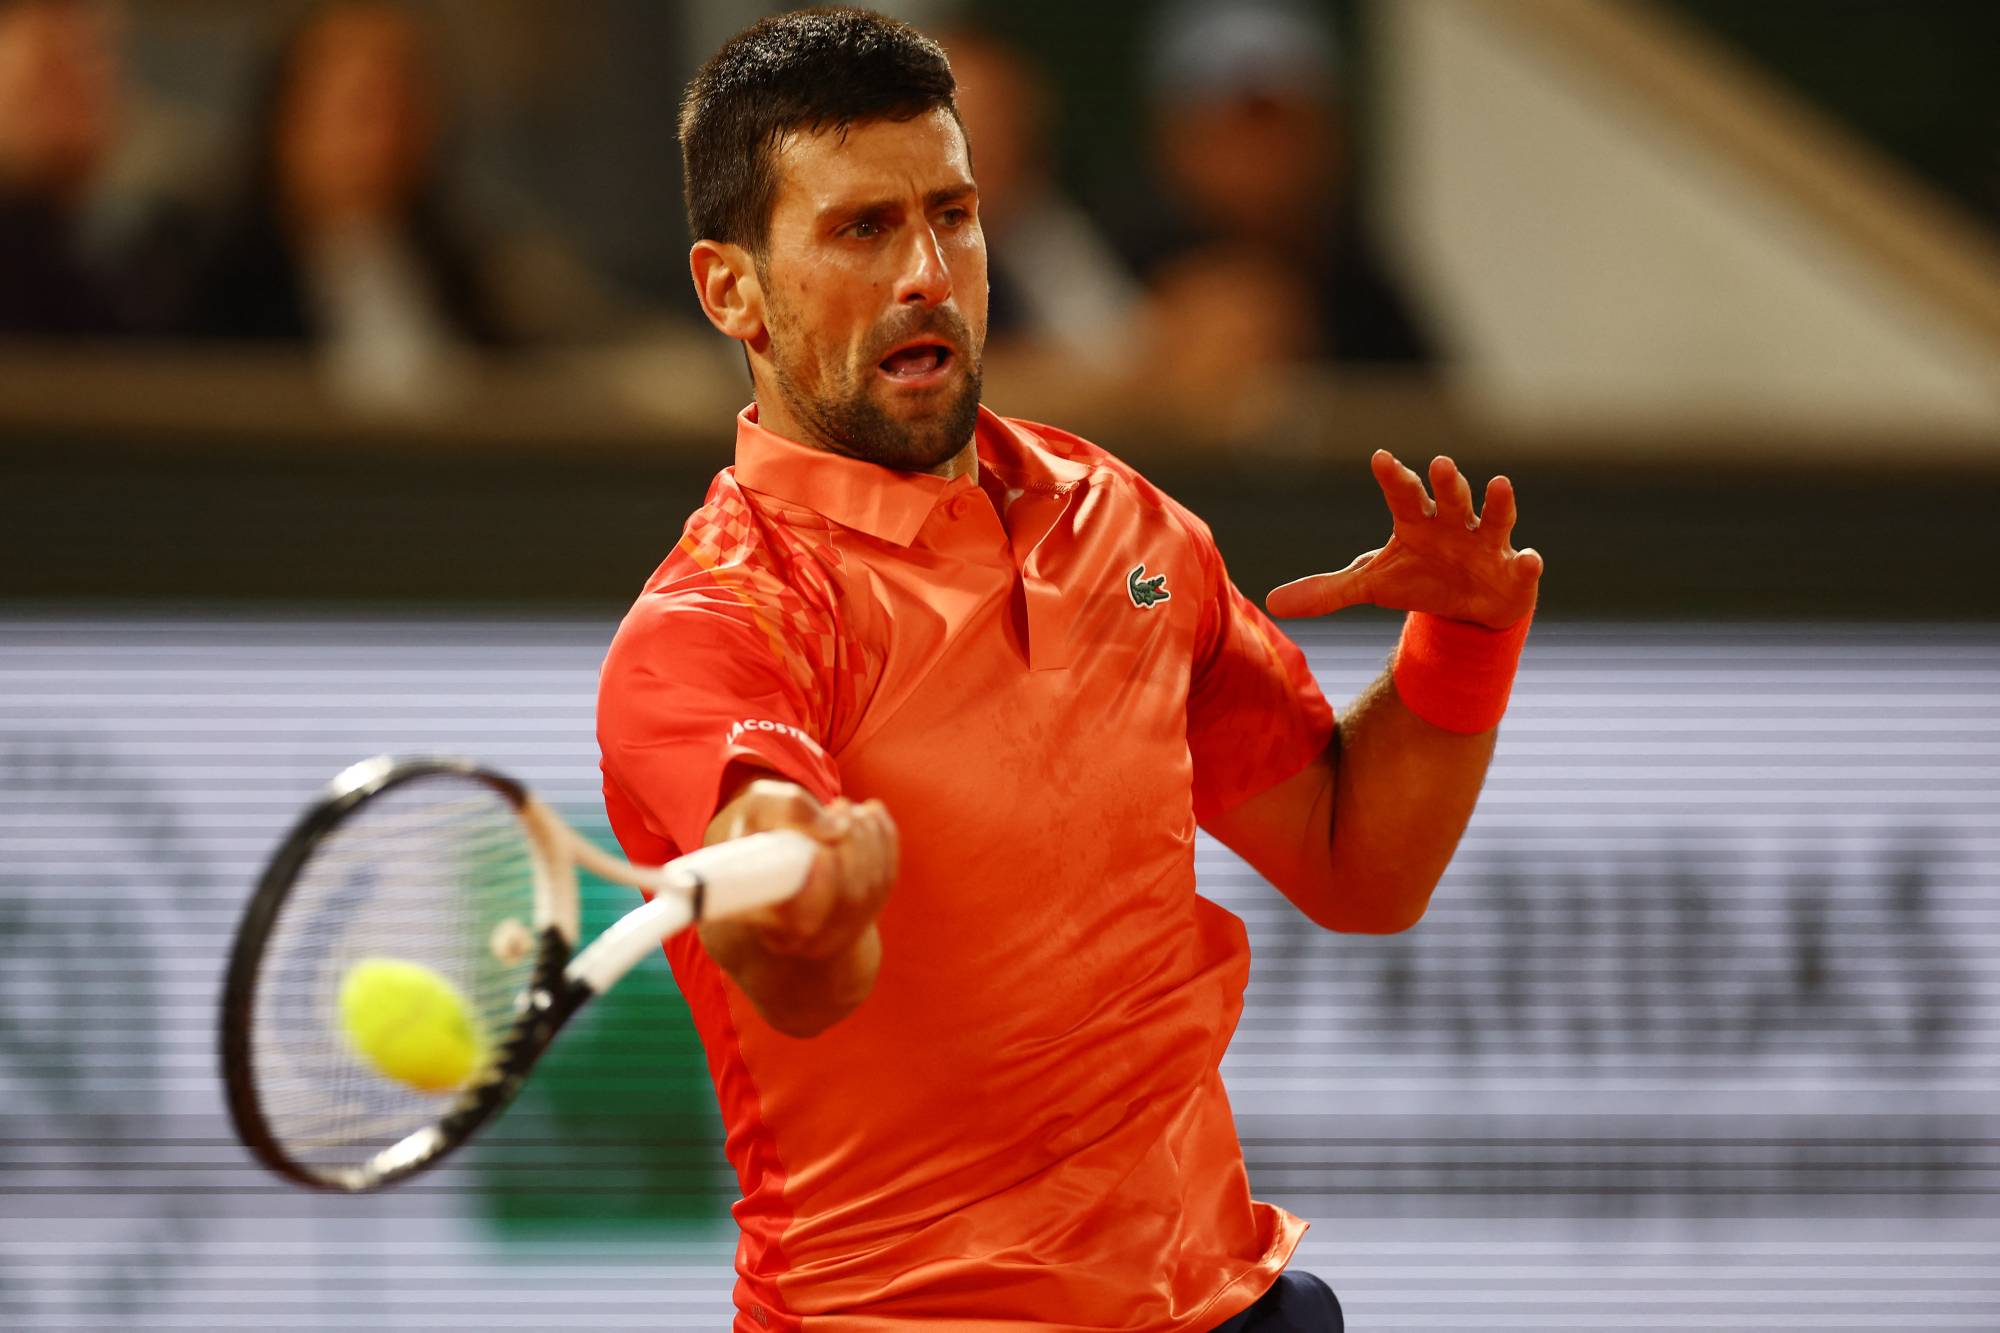 Novak Djokovic doubles down on Kosovo comments after reaching third round of French Open